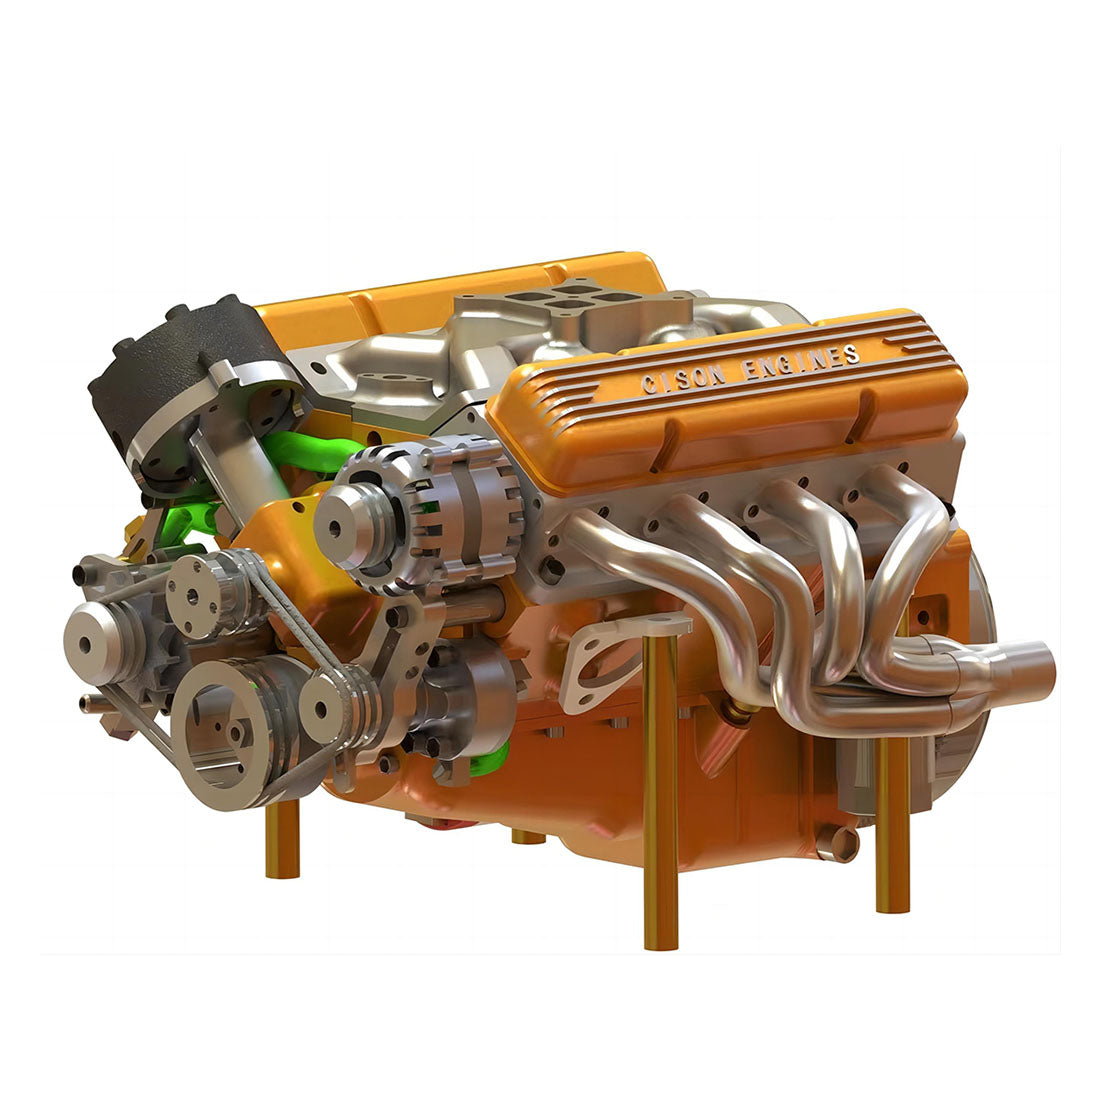 CISON Gasoline OHV V8 Small-block Engine Model Kits 4-Stroke 44cc Water-Cooled 1/6